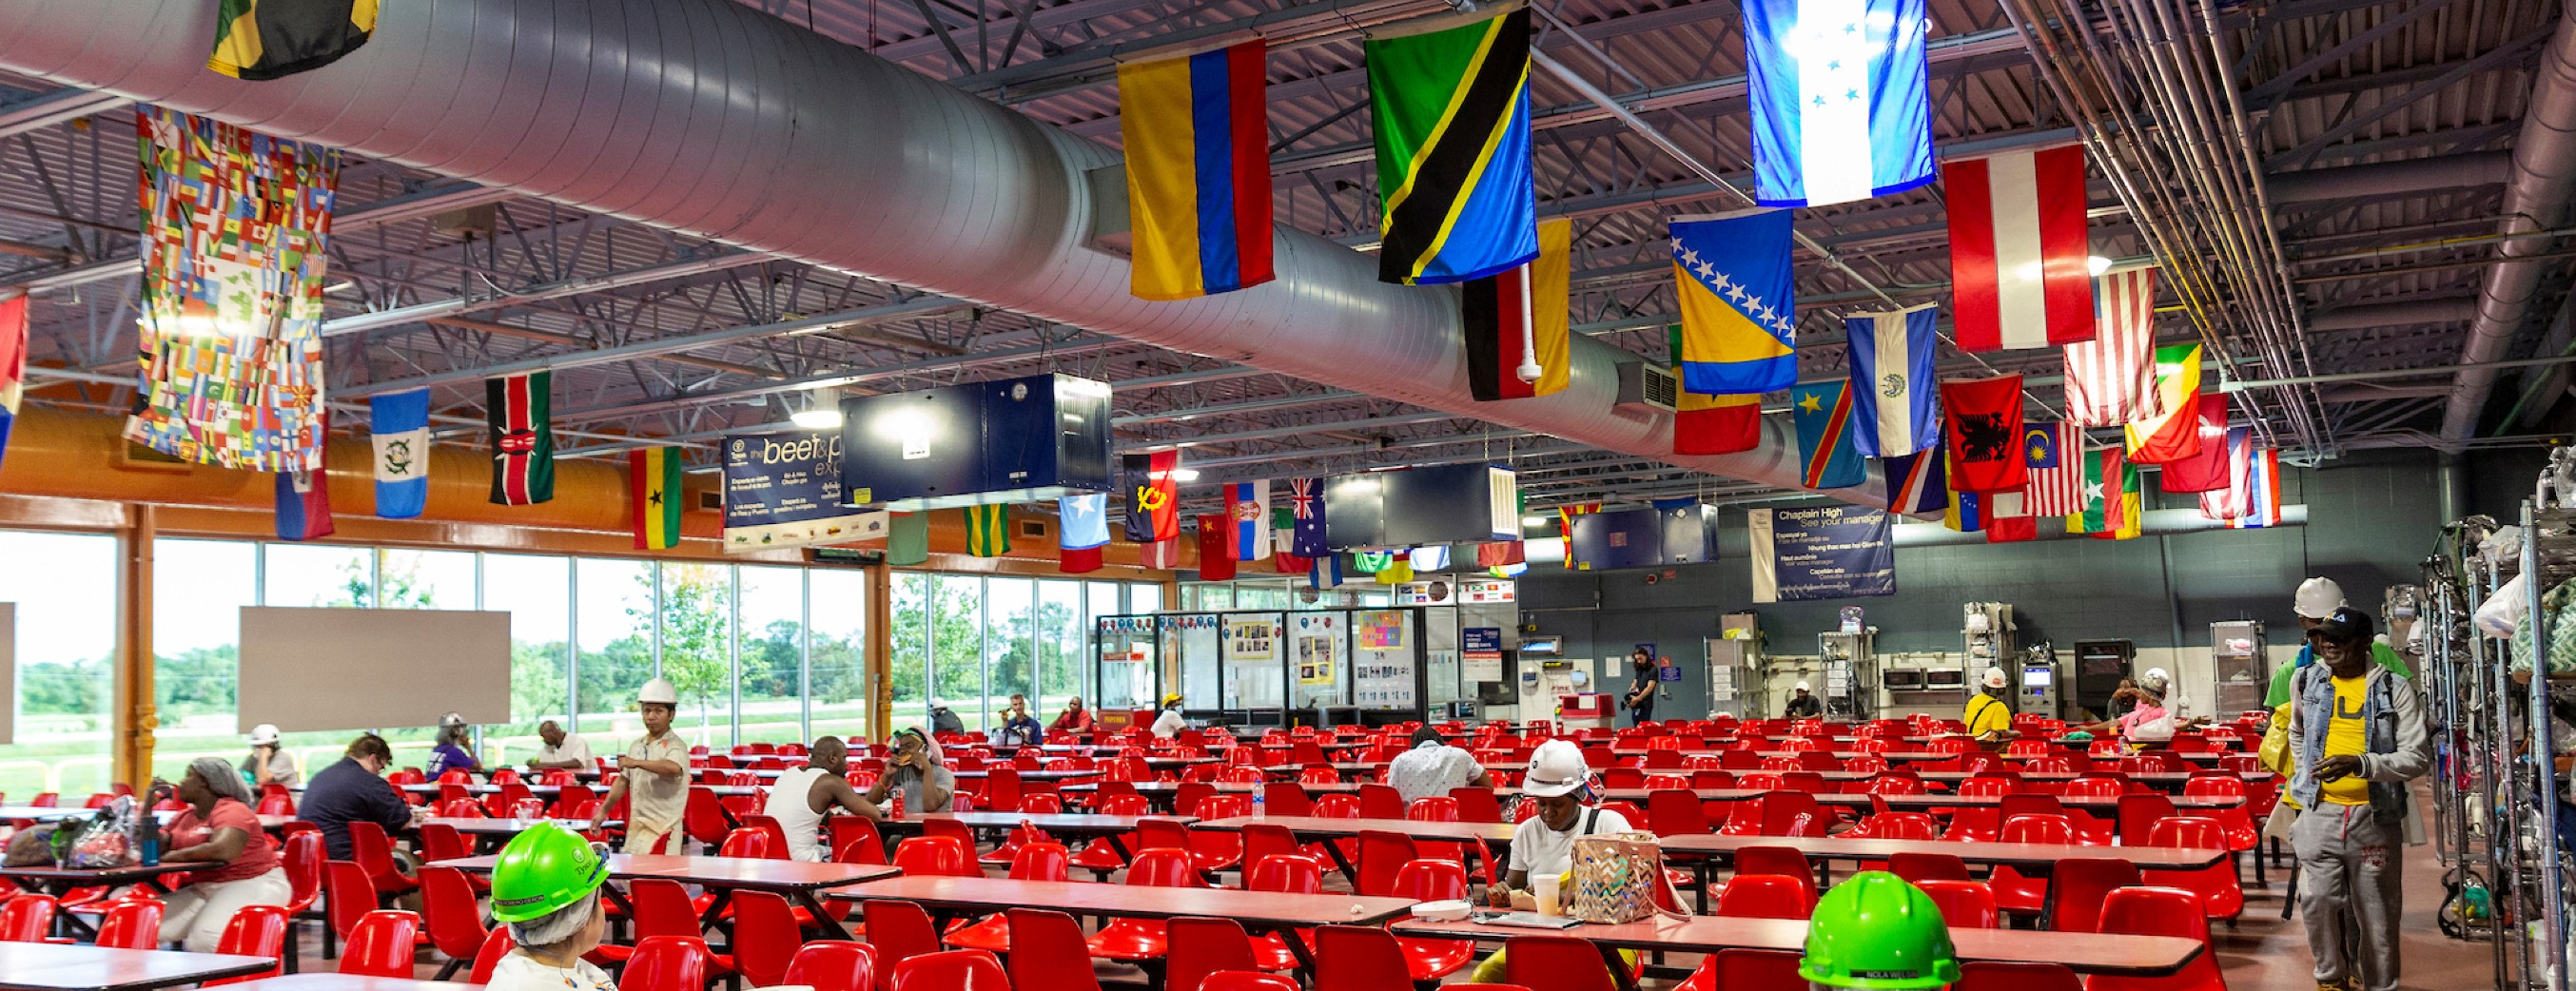 This is an image of a Tyson Foods cafeteria that has international flags on the ceiling.